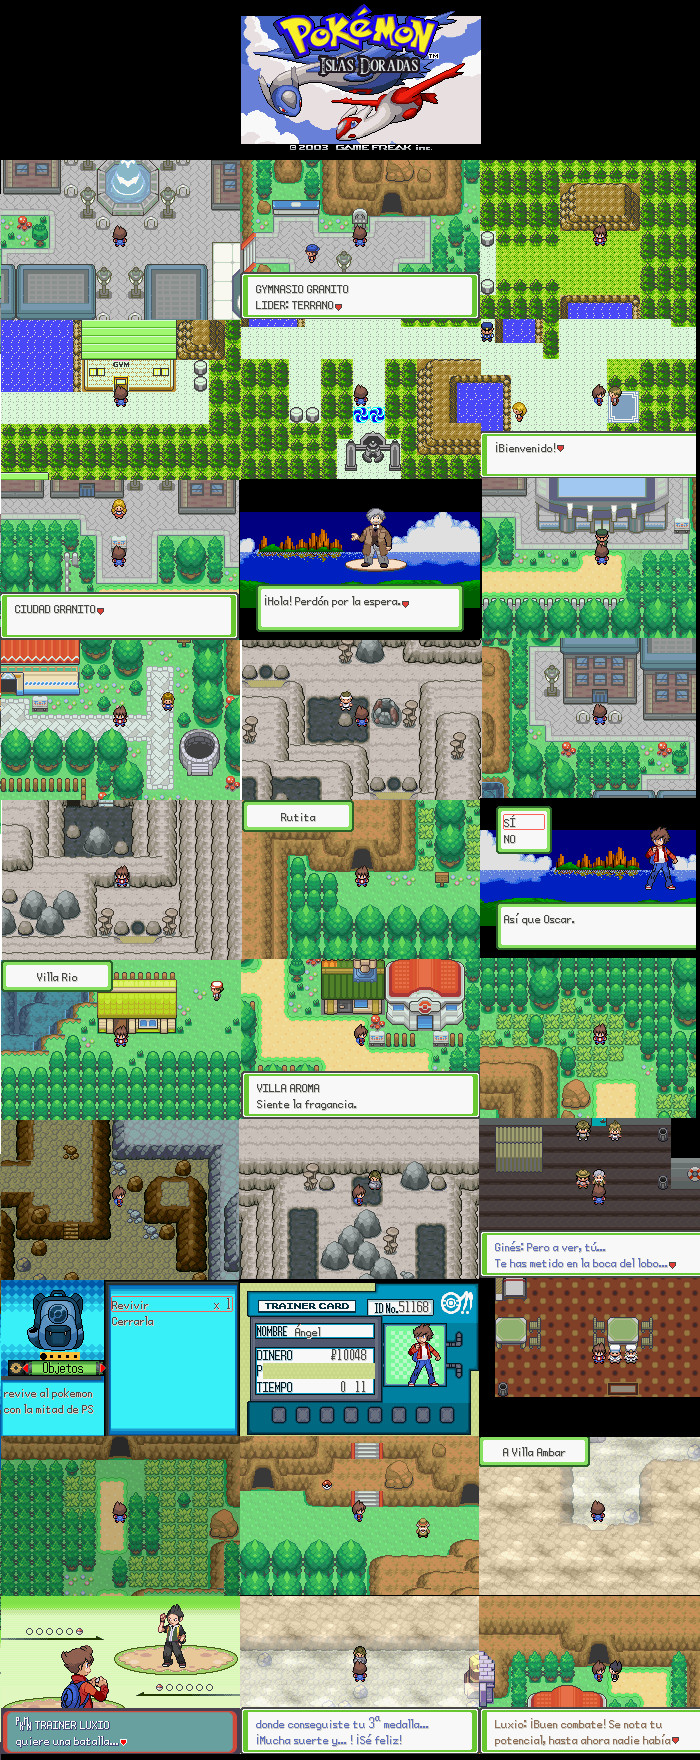 Pokémon Golden Island [Finished for this summer.]